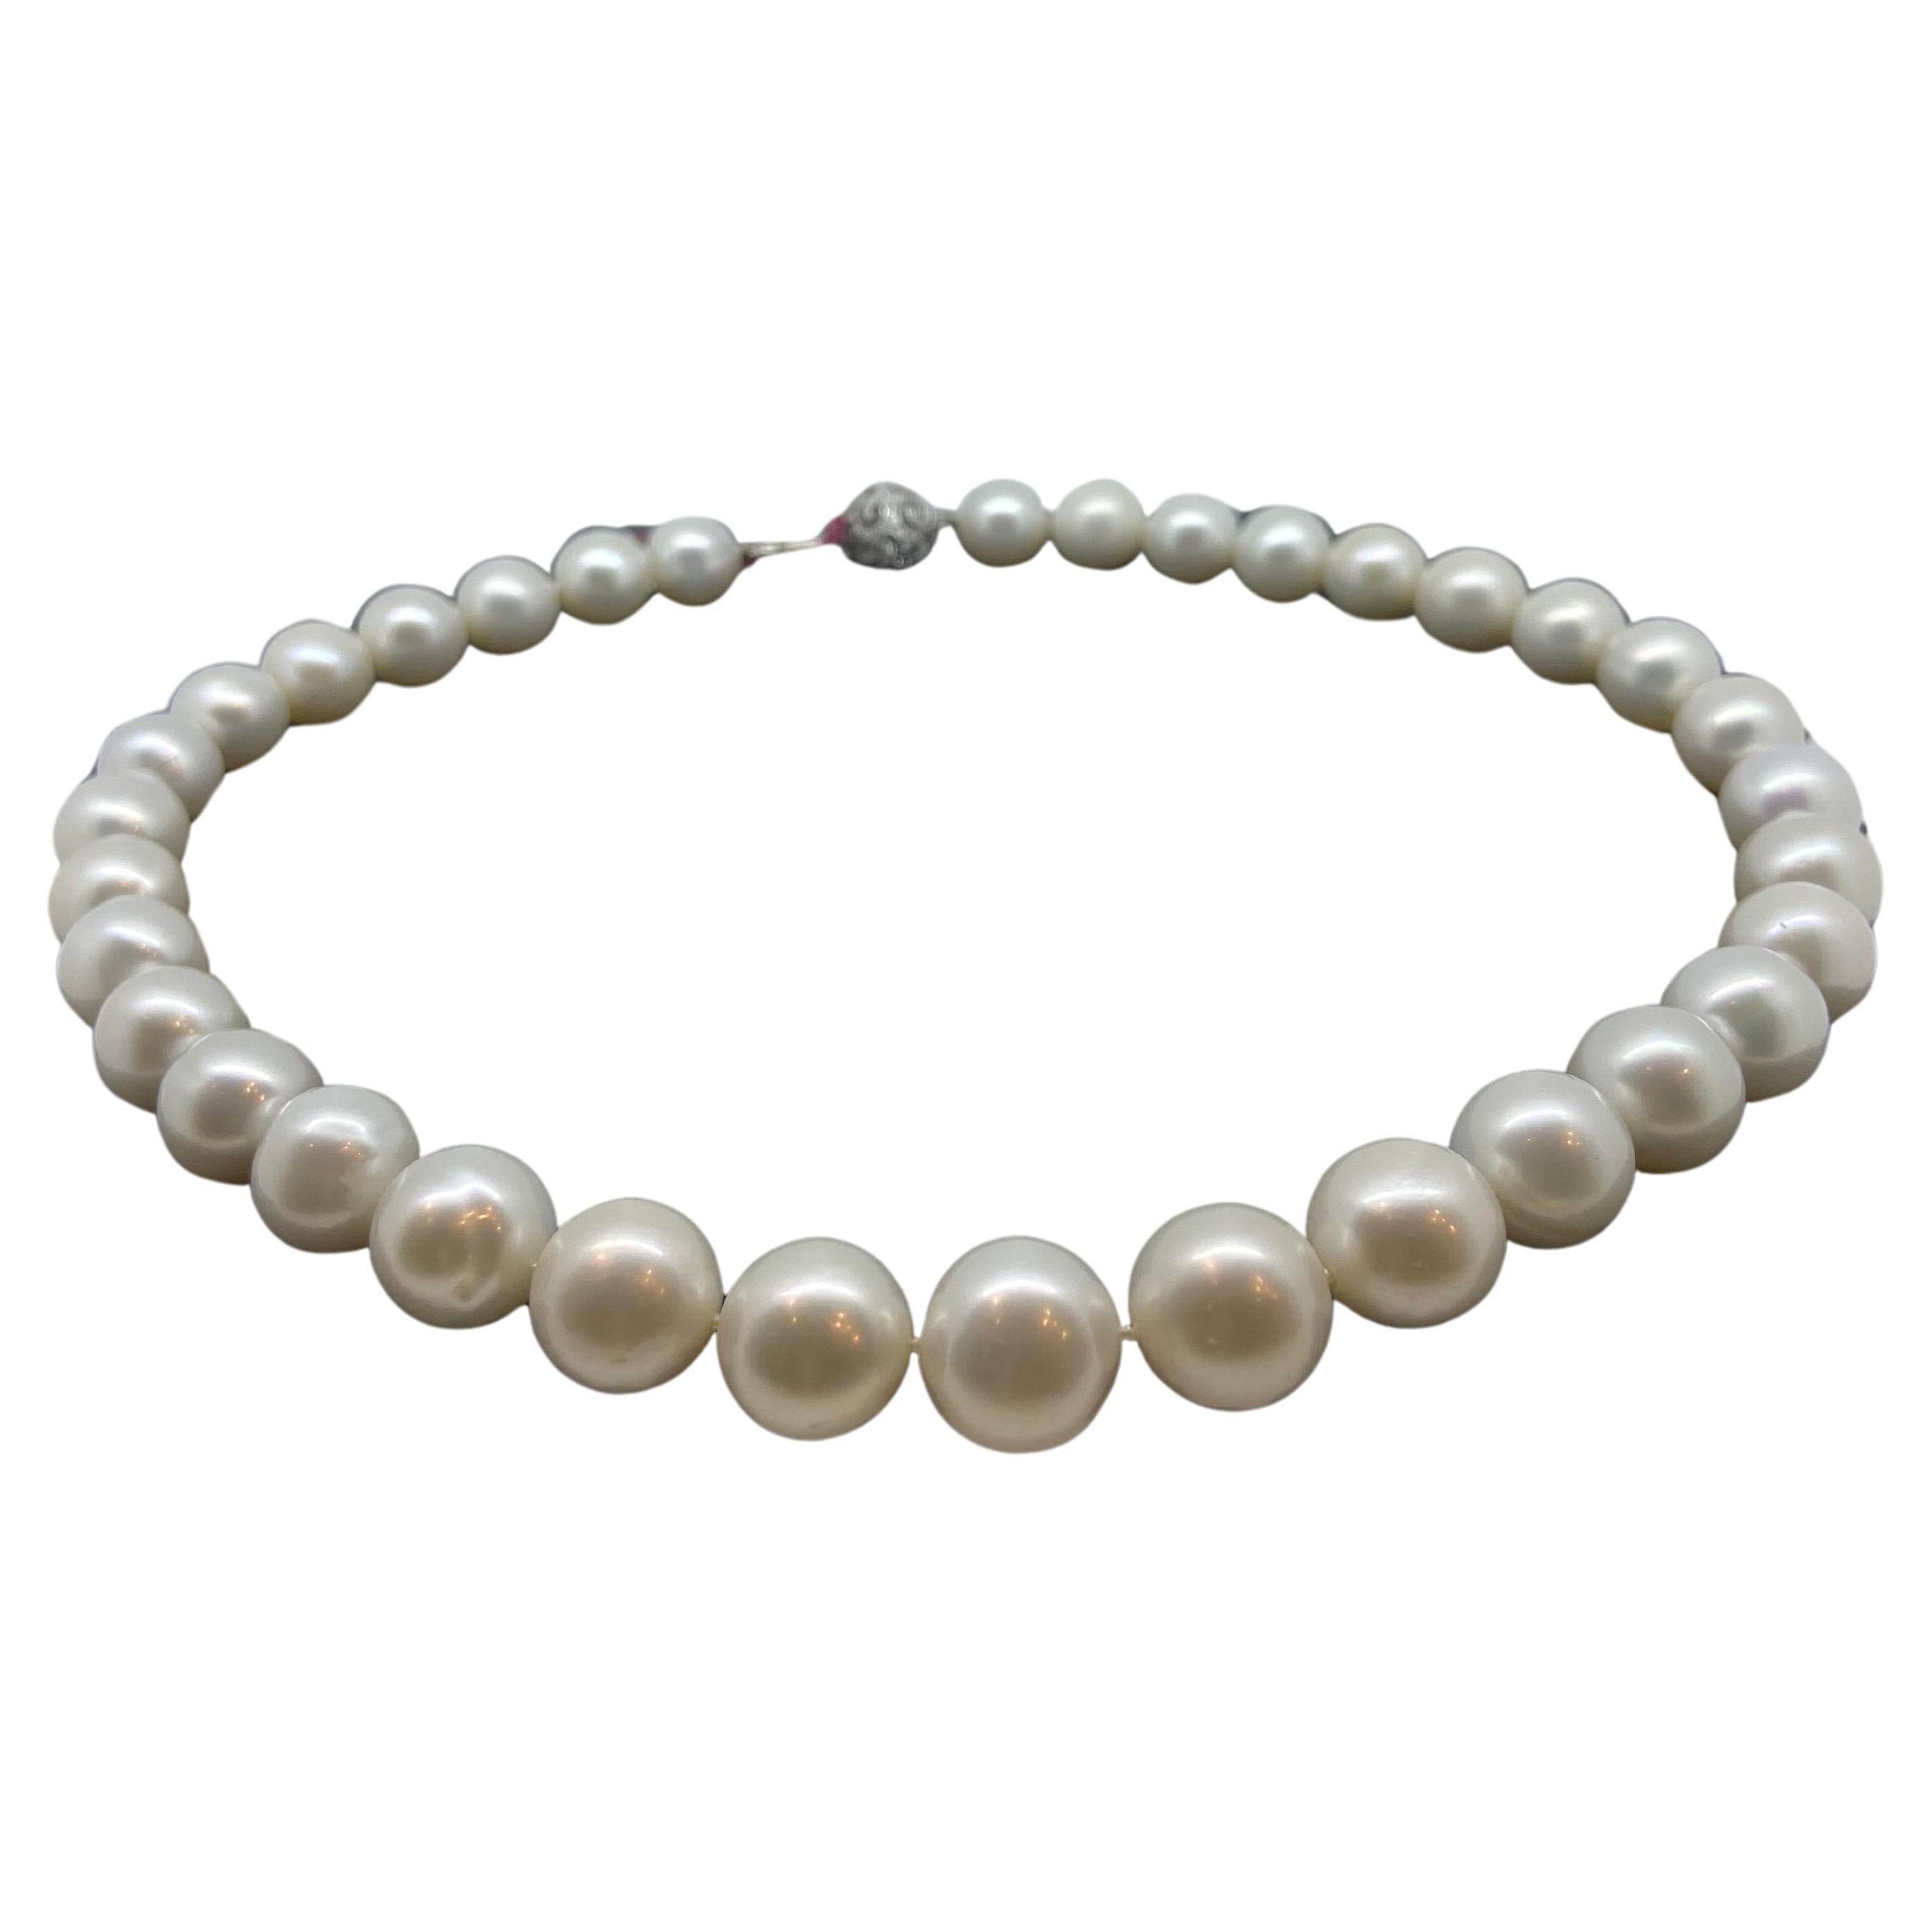 Large 11mm-14mm Cultured Pearl Necklace. Gold & Diamond Clasp. Valued at $4850! For Sale